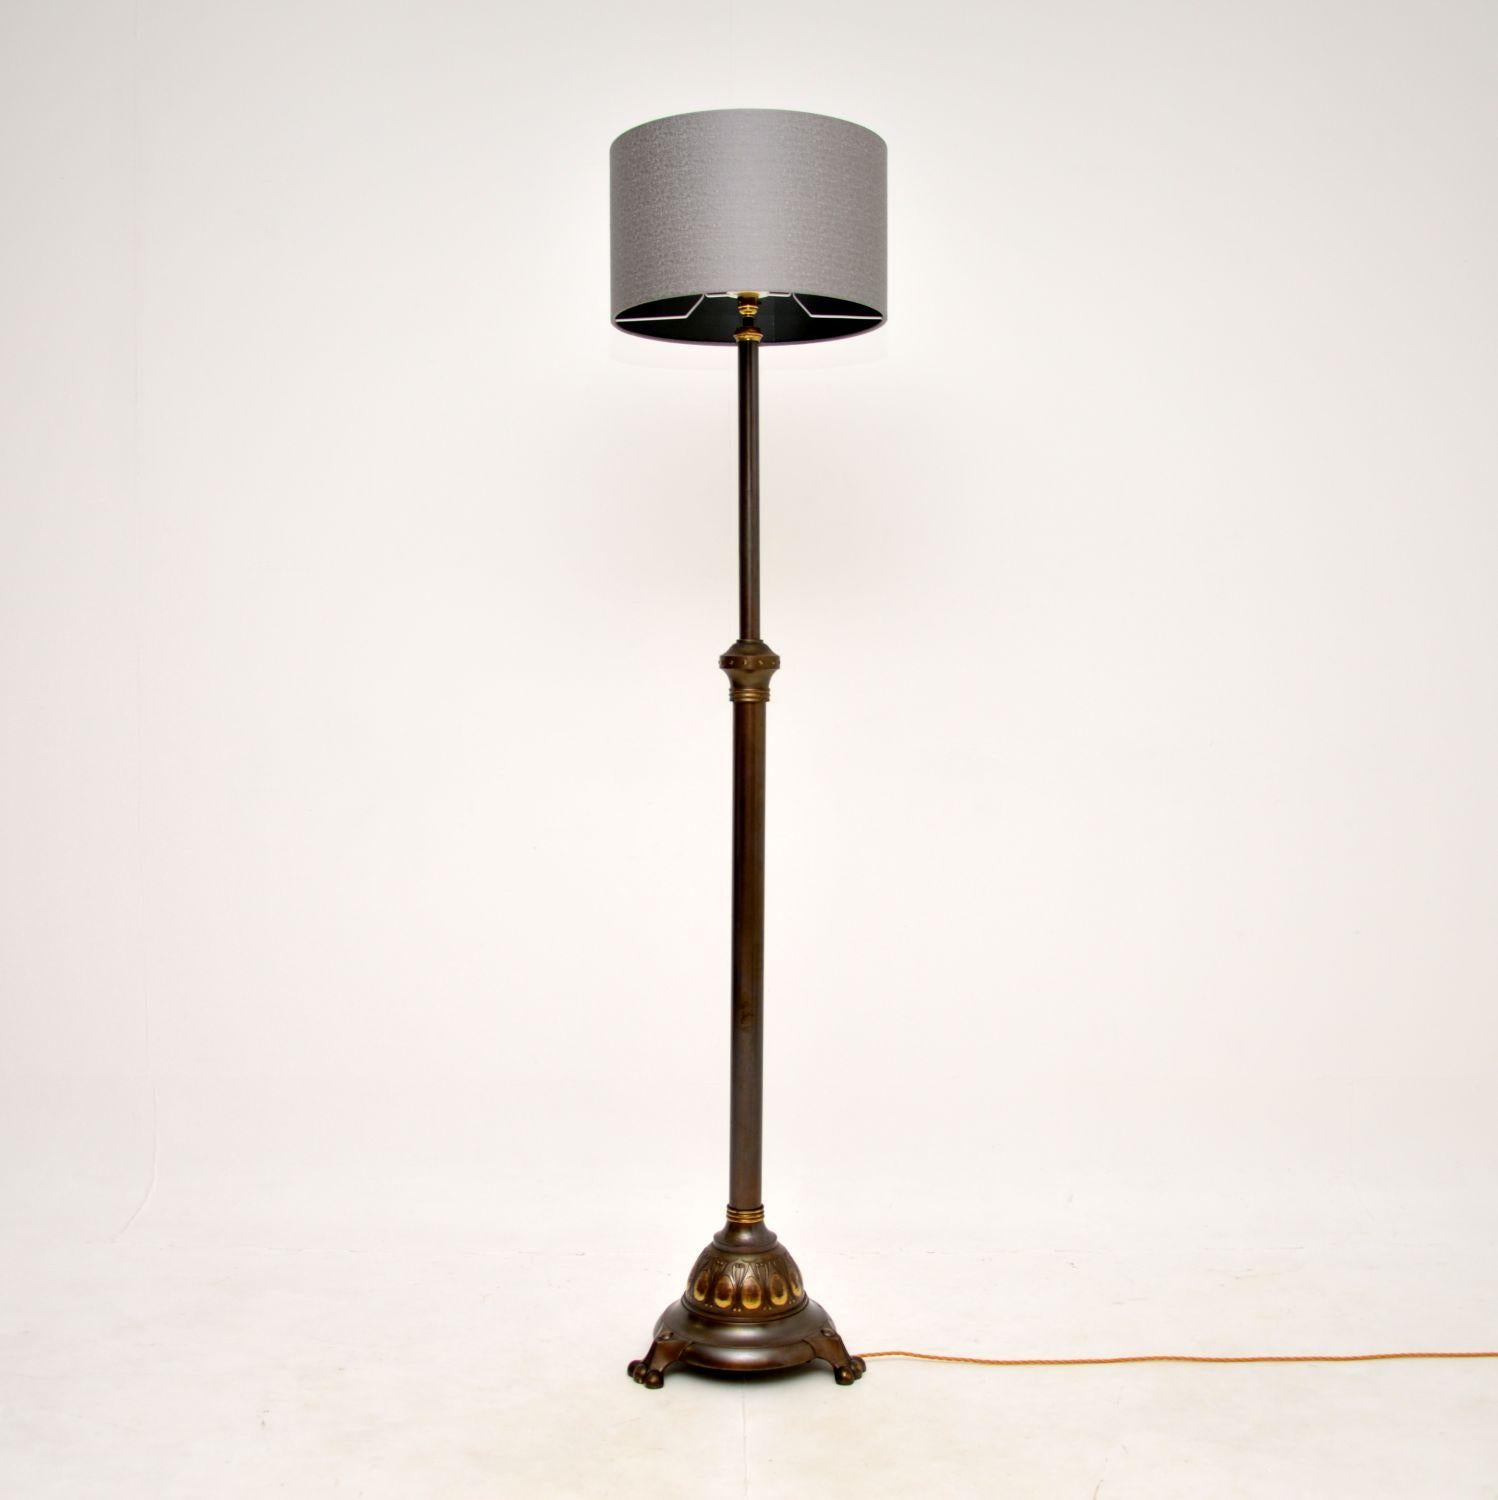 A fantastic antique Swedish neoclassical floor lamp, made from steel and brass. This was recently imported from Sweden, it dates from around the 1890-1910 period.

It is of superb quality, with a very bold and beautiful design. The metal has a